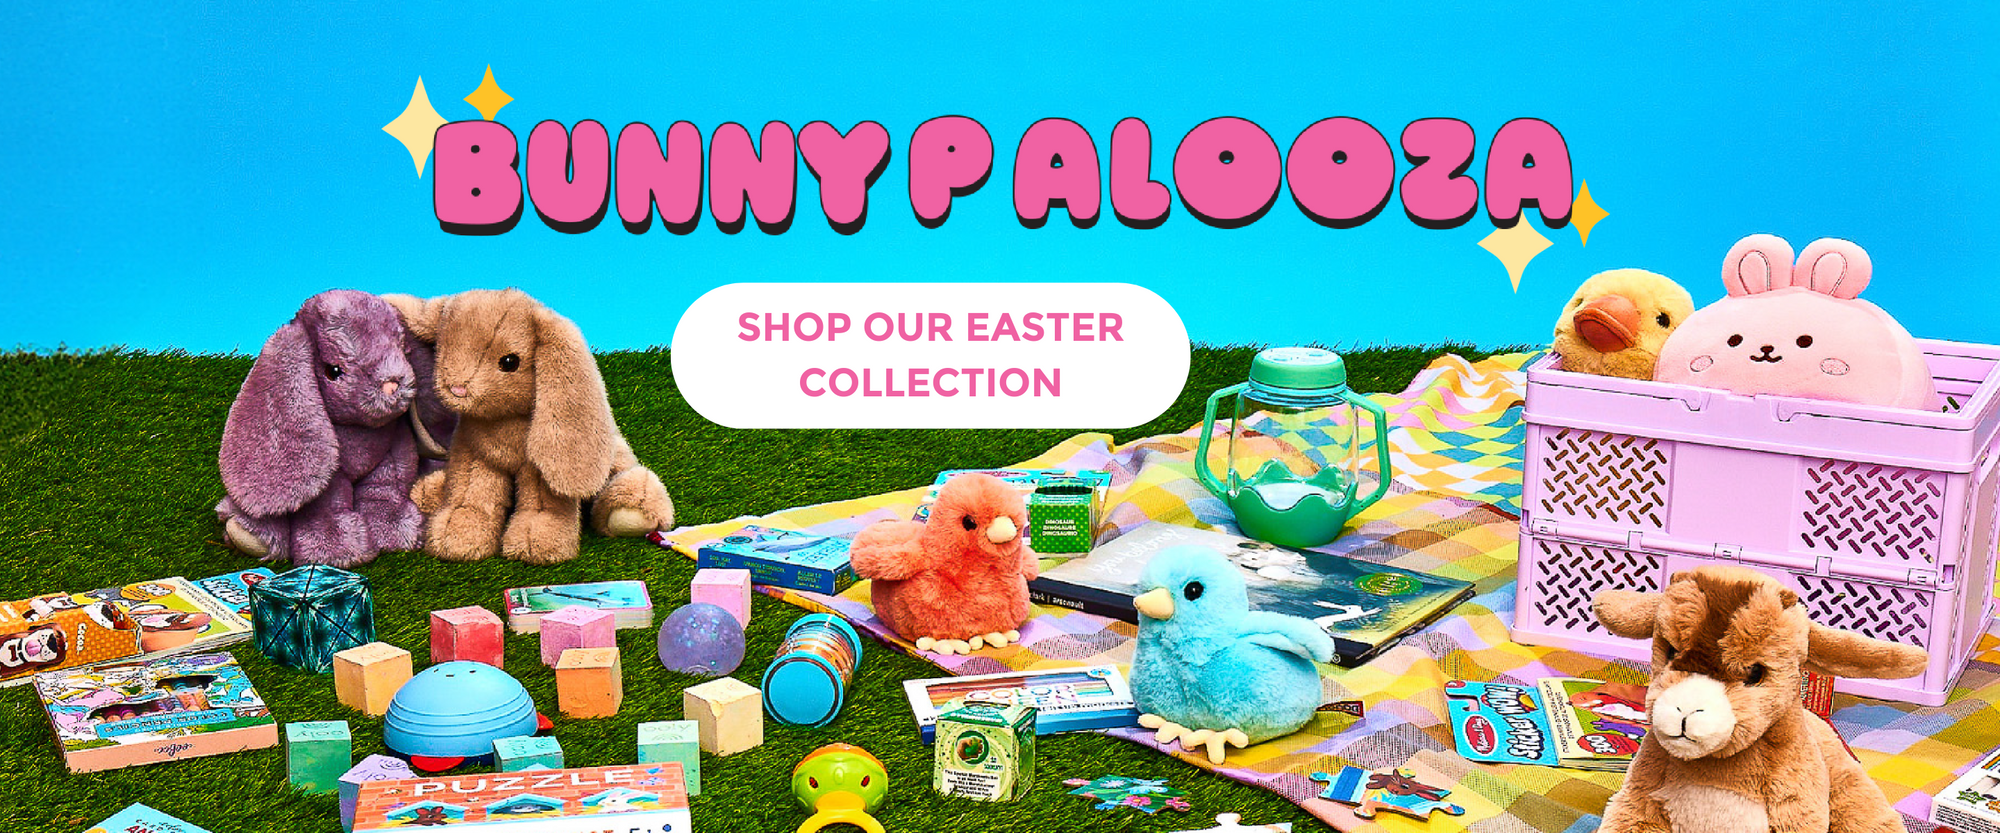 SHOP OUR EASTER COLLECTION